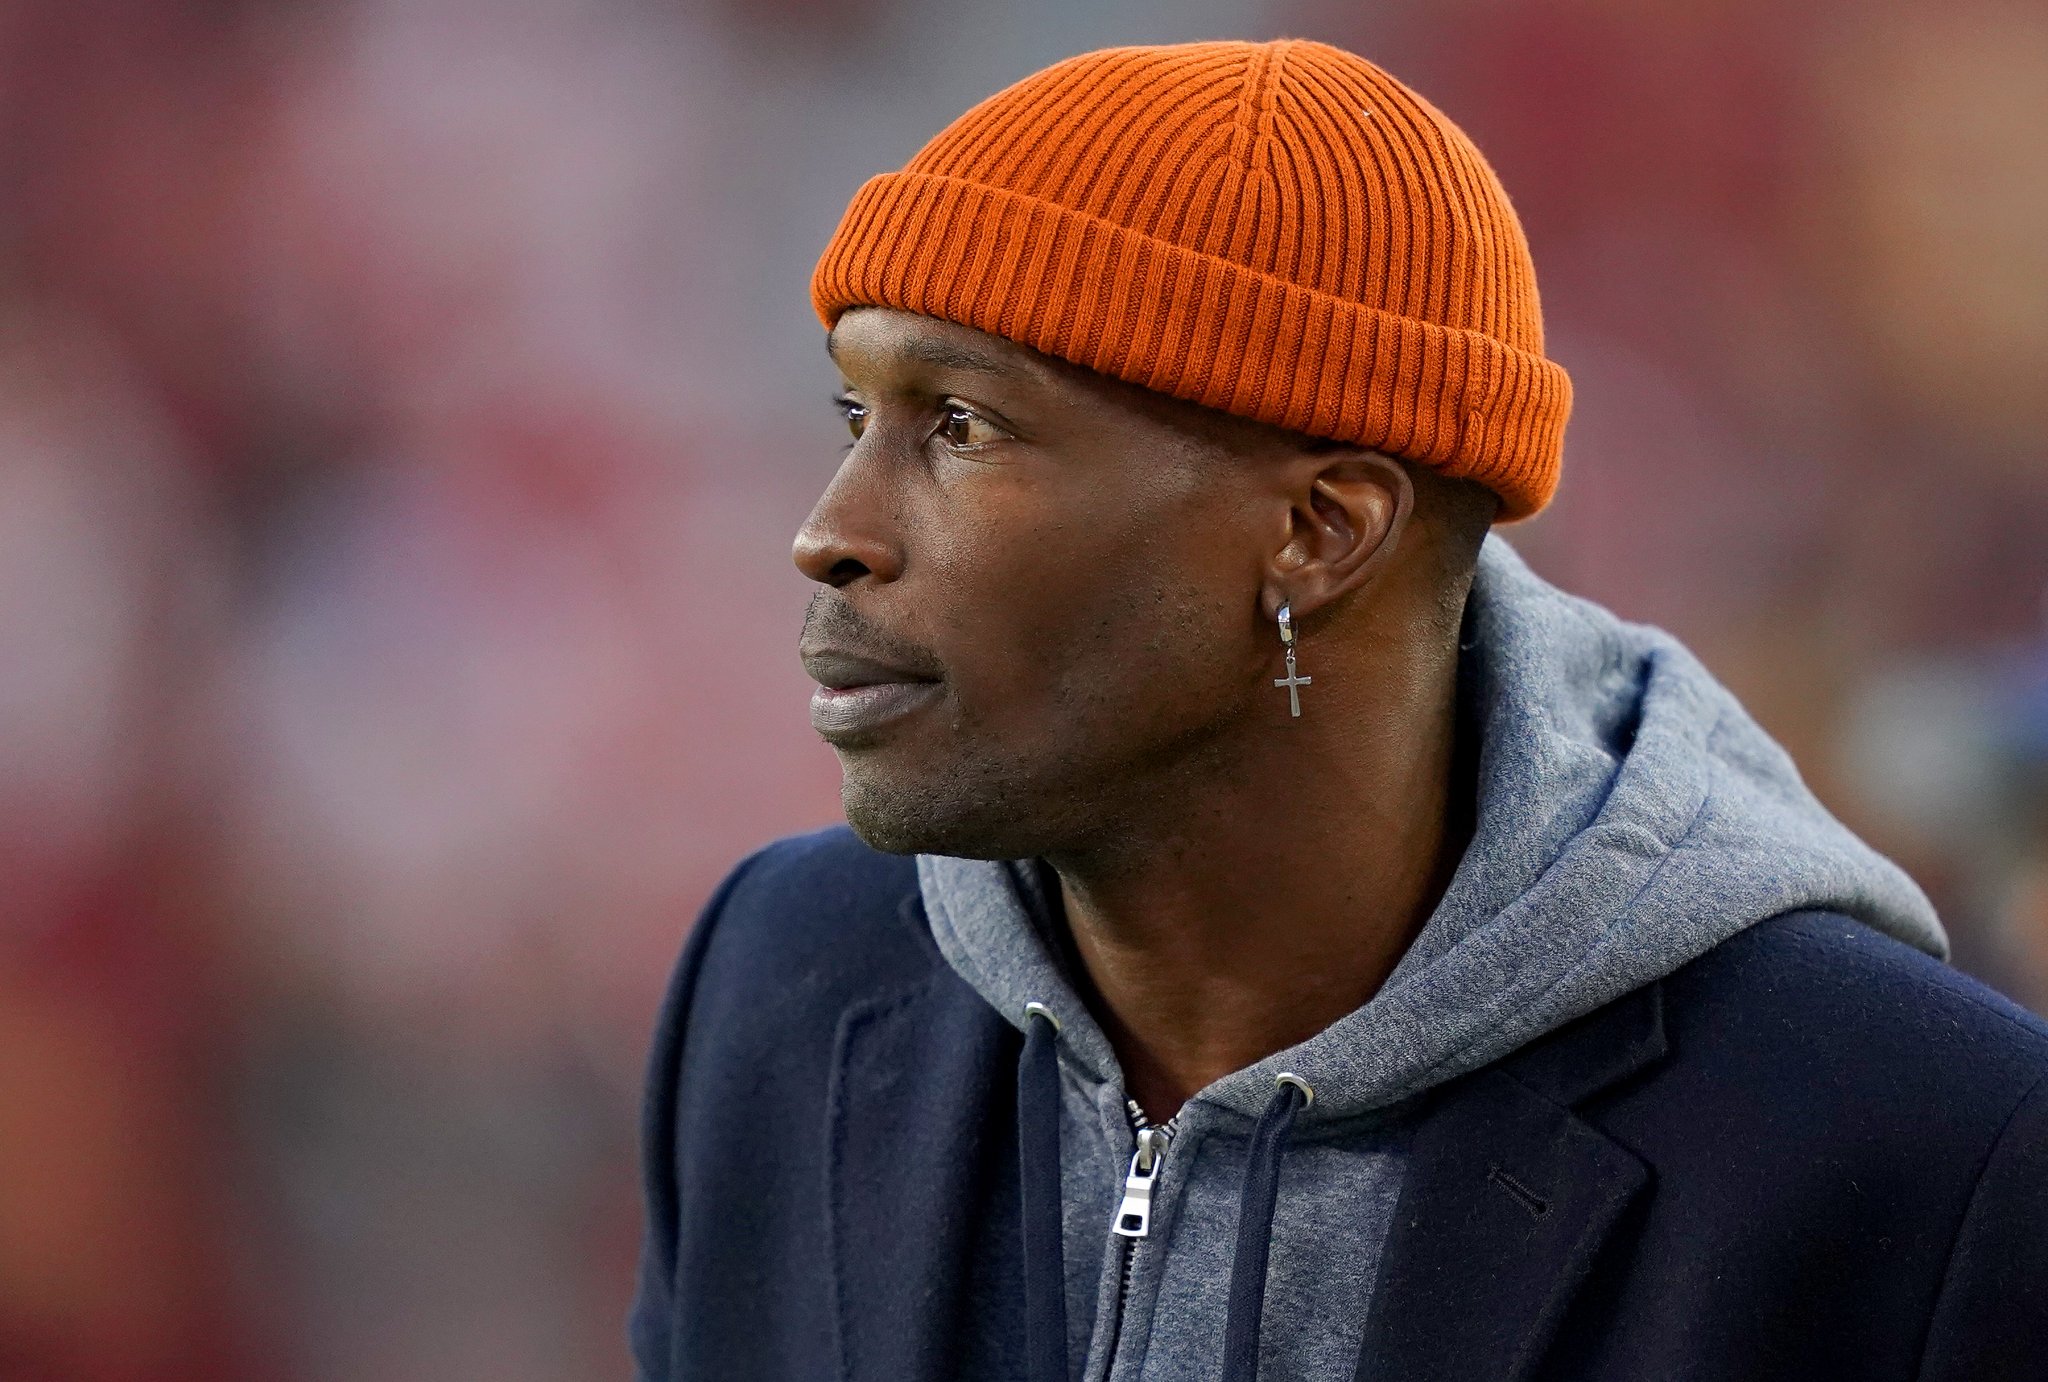 Chad Johnson Continues Being The Charitable GOAT, Leaves Obscene Tip On $37 Restaurant Bill To Help With Pandemic Fallout